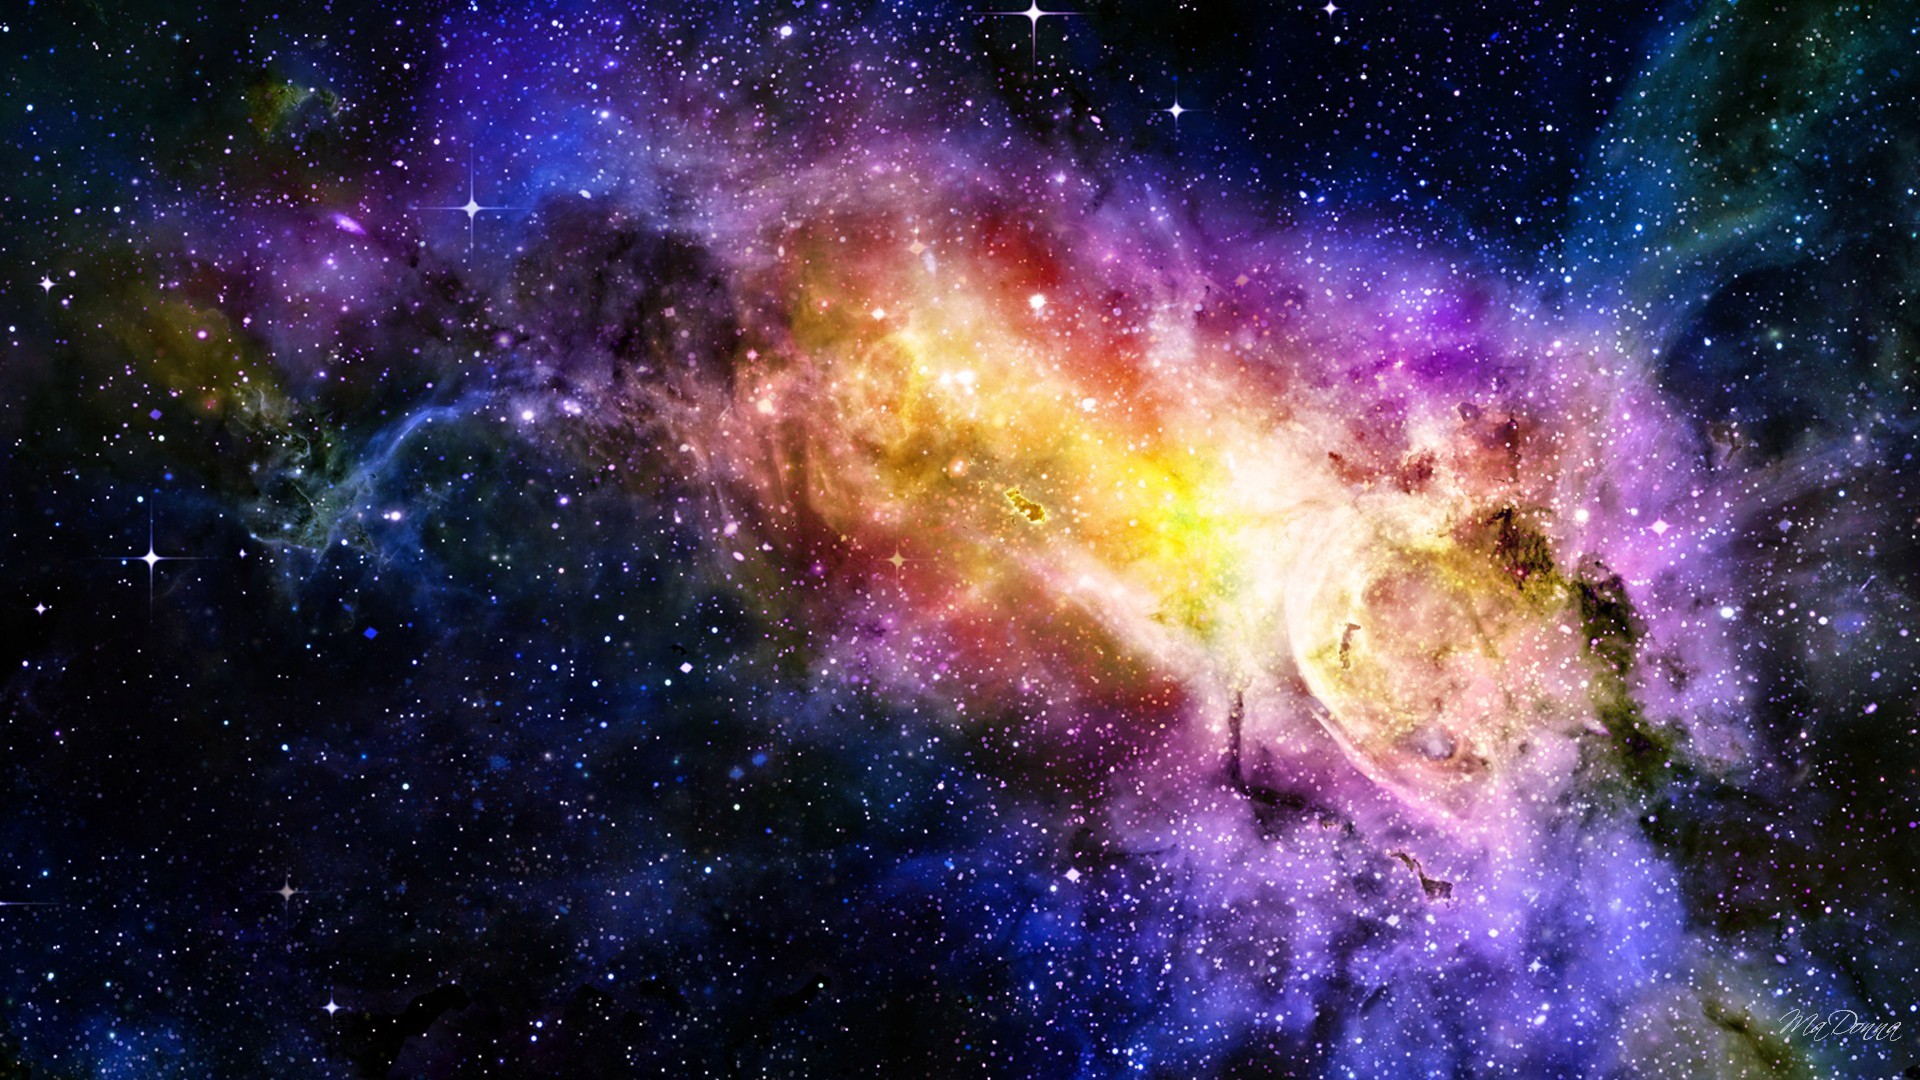 1920x1080 best Space Wallpapers images on Pinterest 1920Ã1080